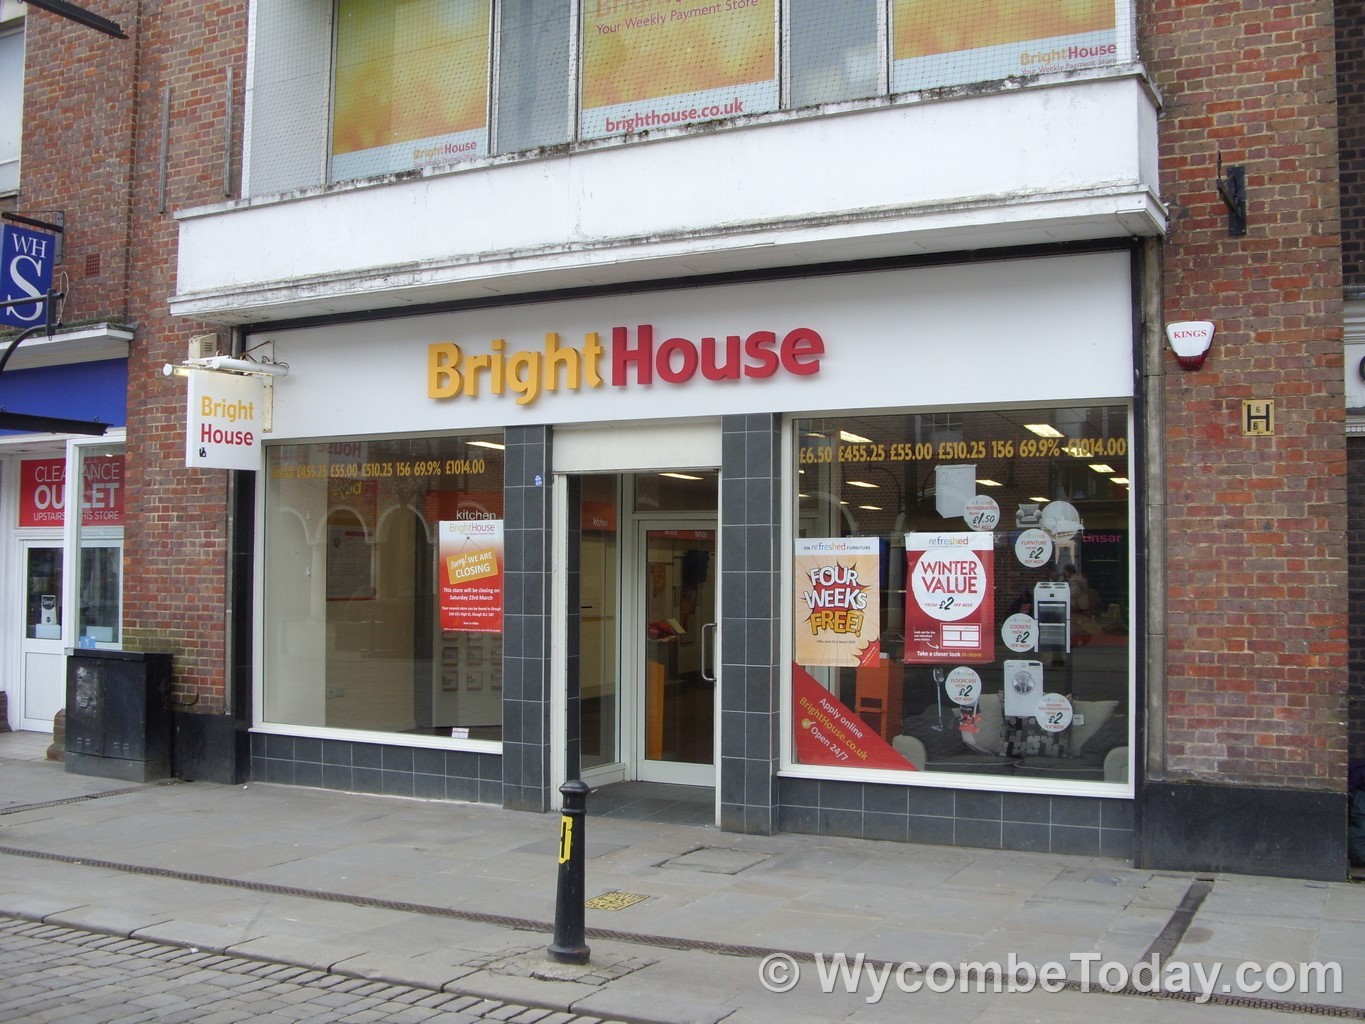 HighWycombe-HighStreet-BrightHouse-2019-03-21-SDC16812